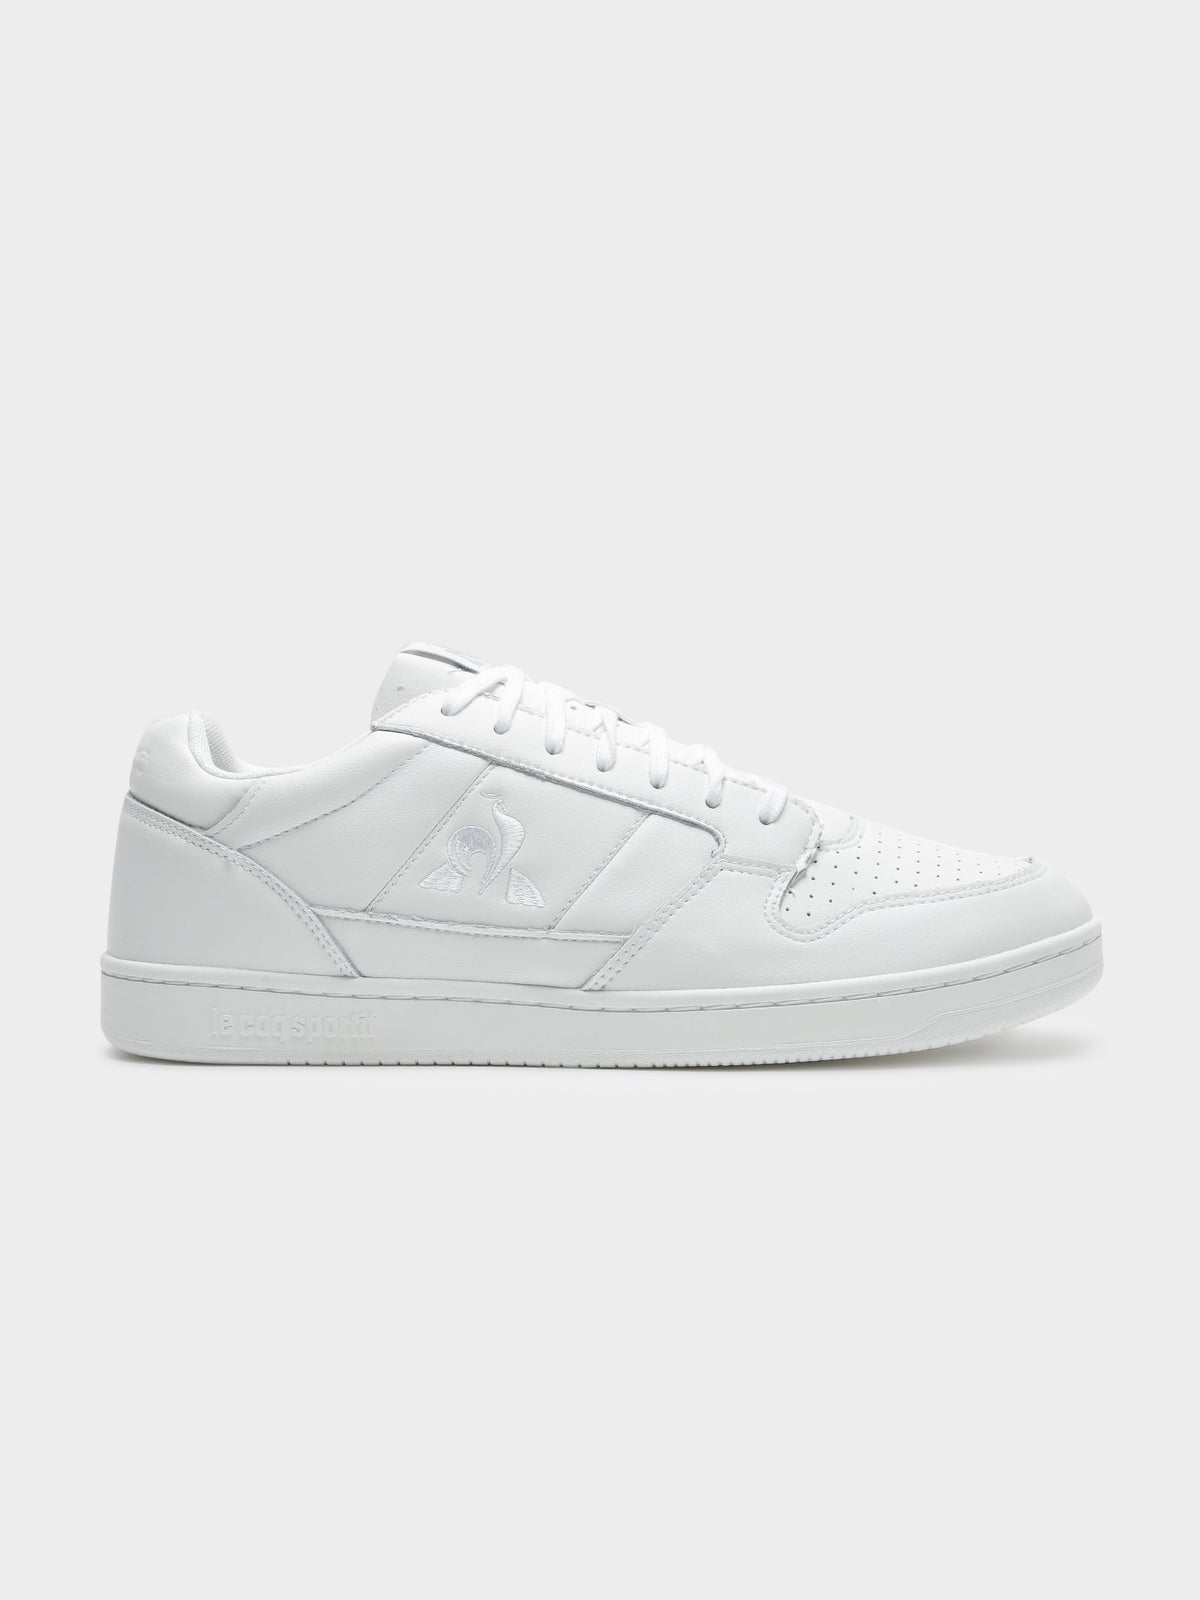 Mens Breakpoint Sneakers in Optical White